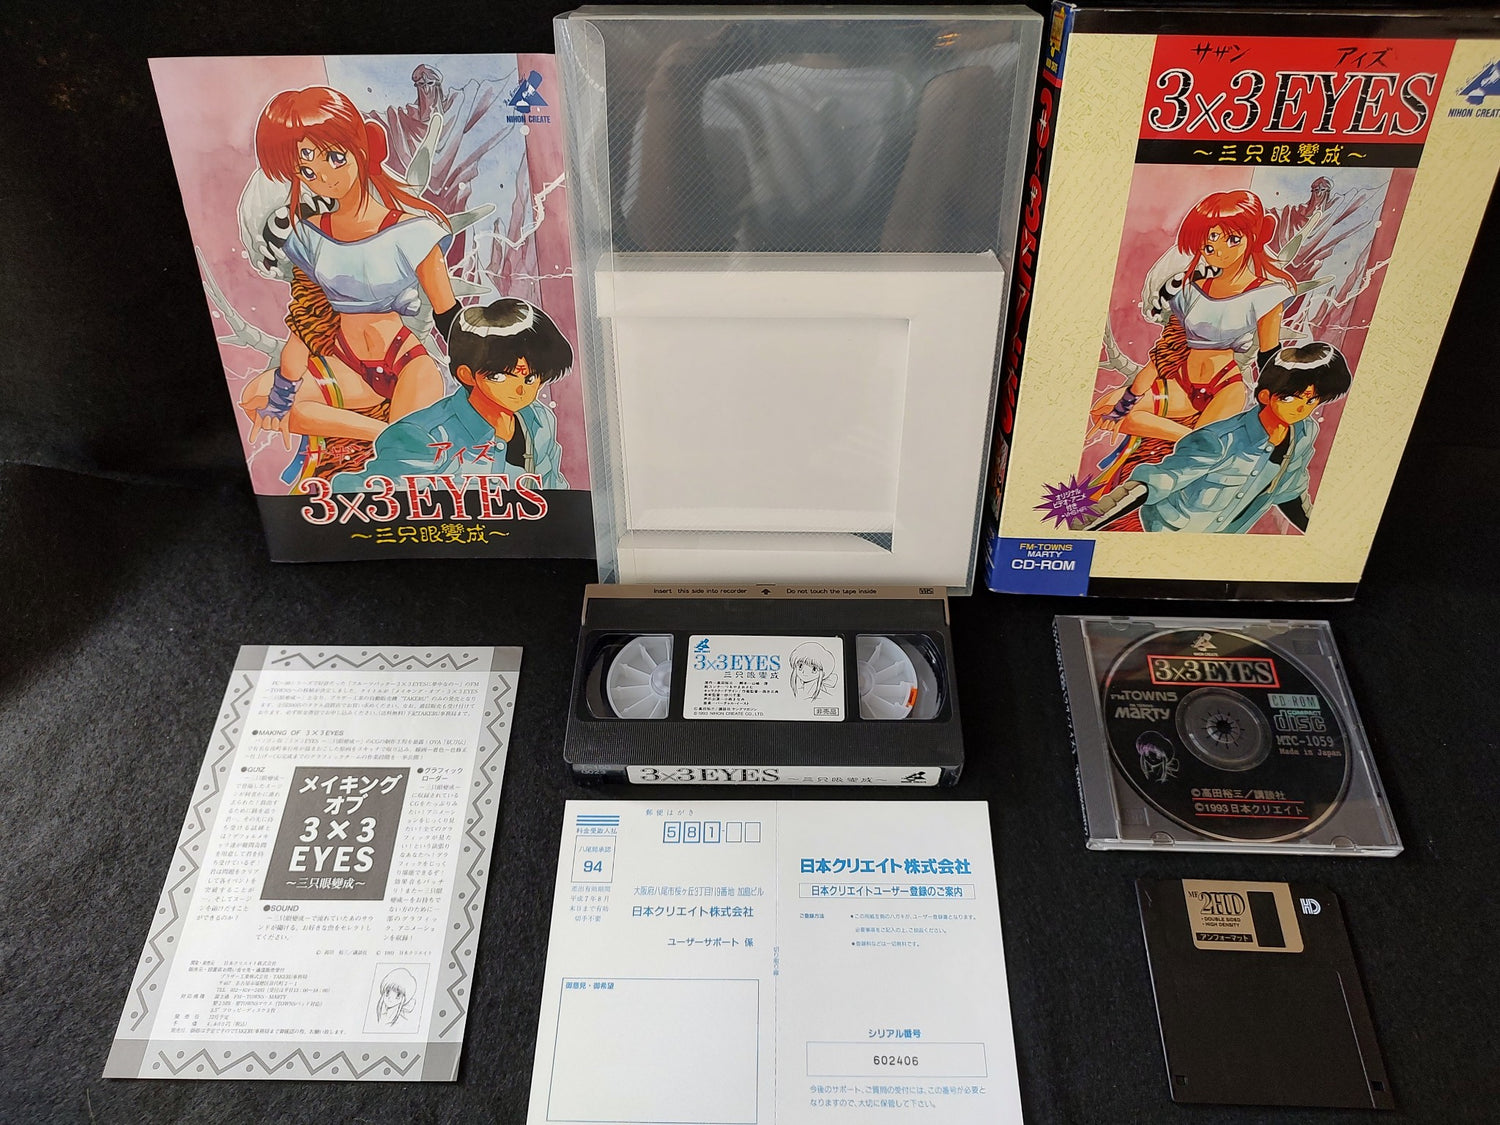 3×3 EYES FM TOWNS Marty Game, Disk, w/Manual and Box set 